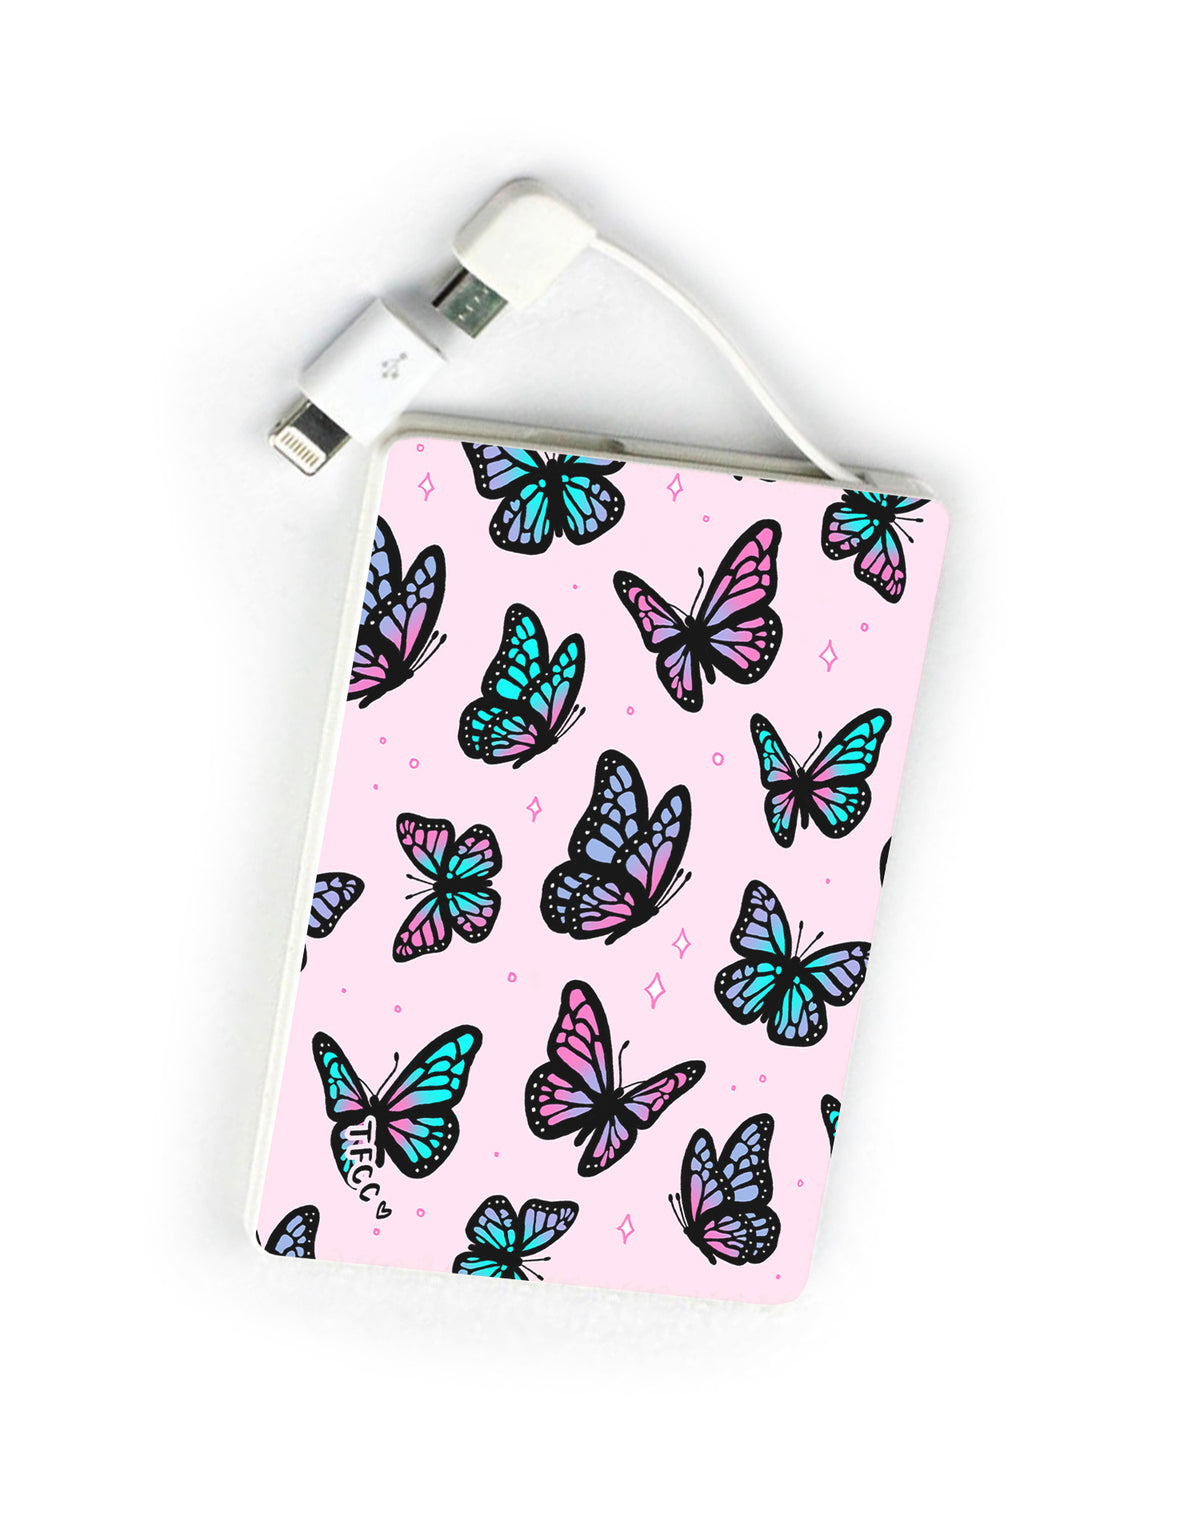 Butterfly Power Bank - thefonecasecompany